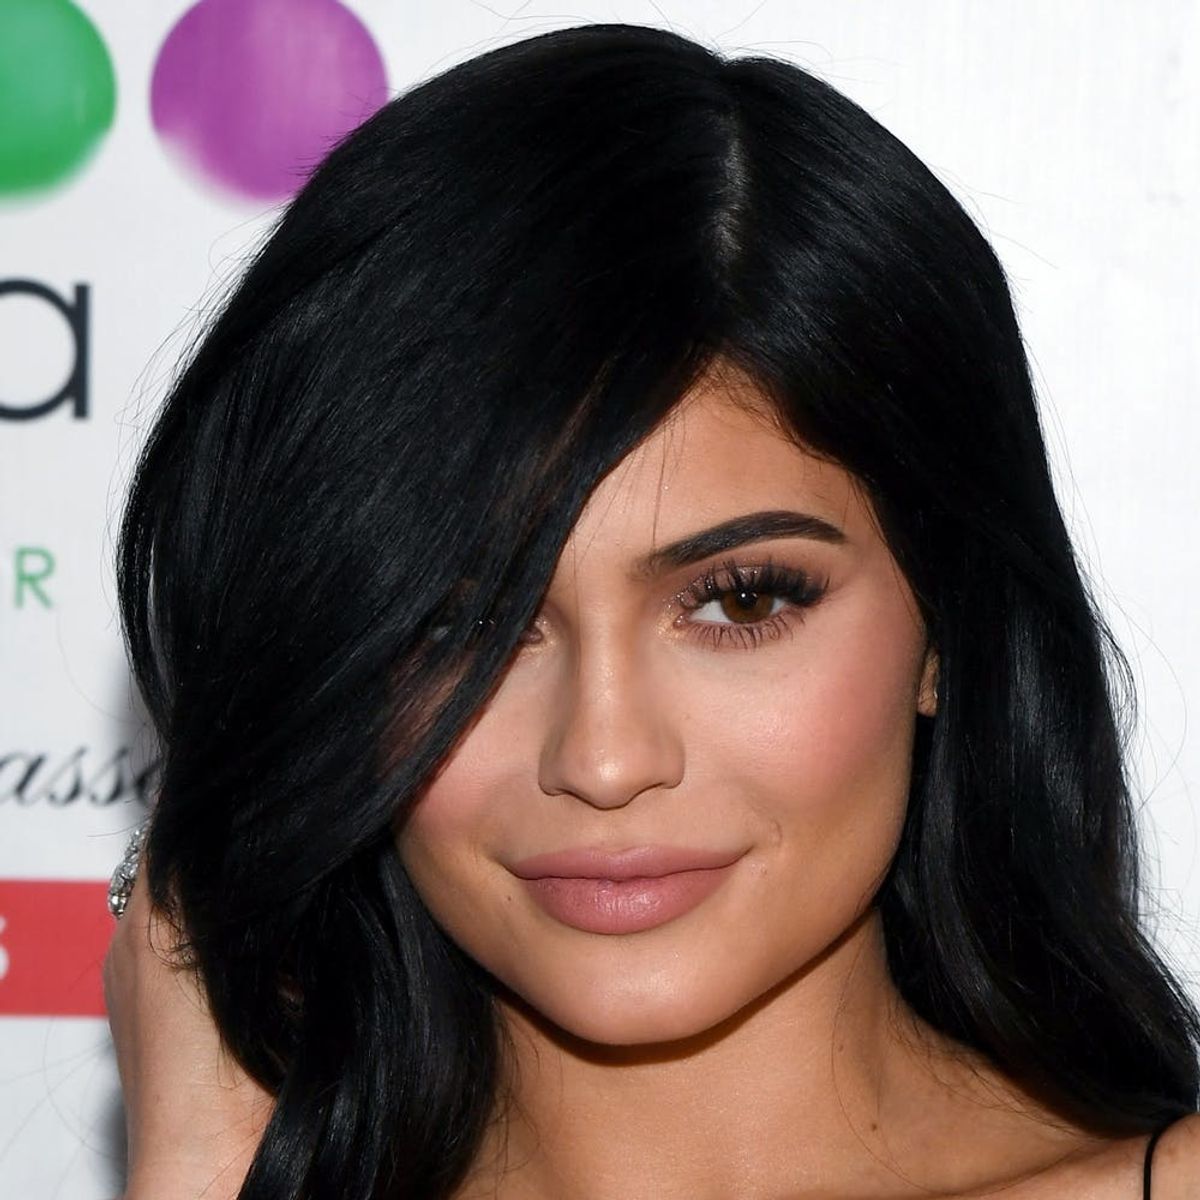 See Kylie Jenner As a Cherry Redhead